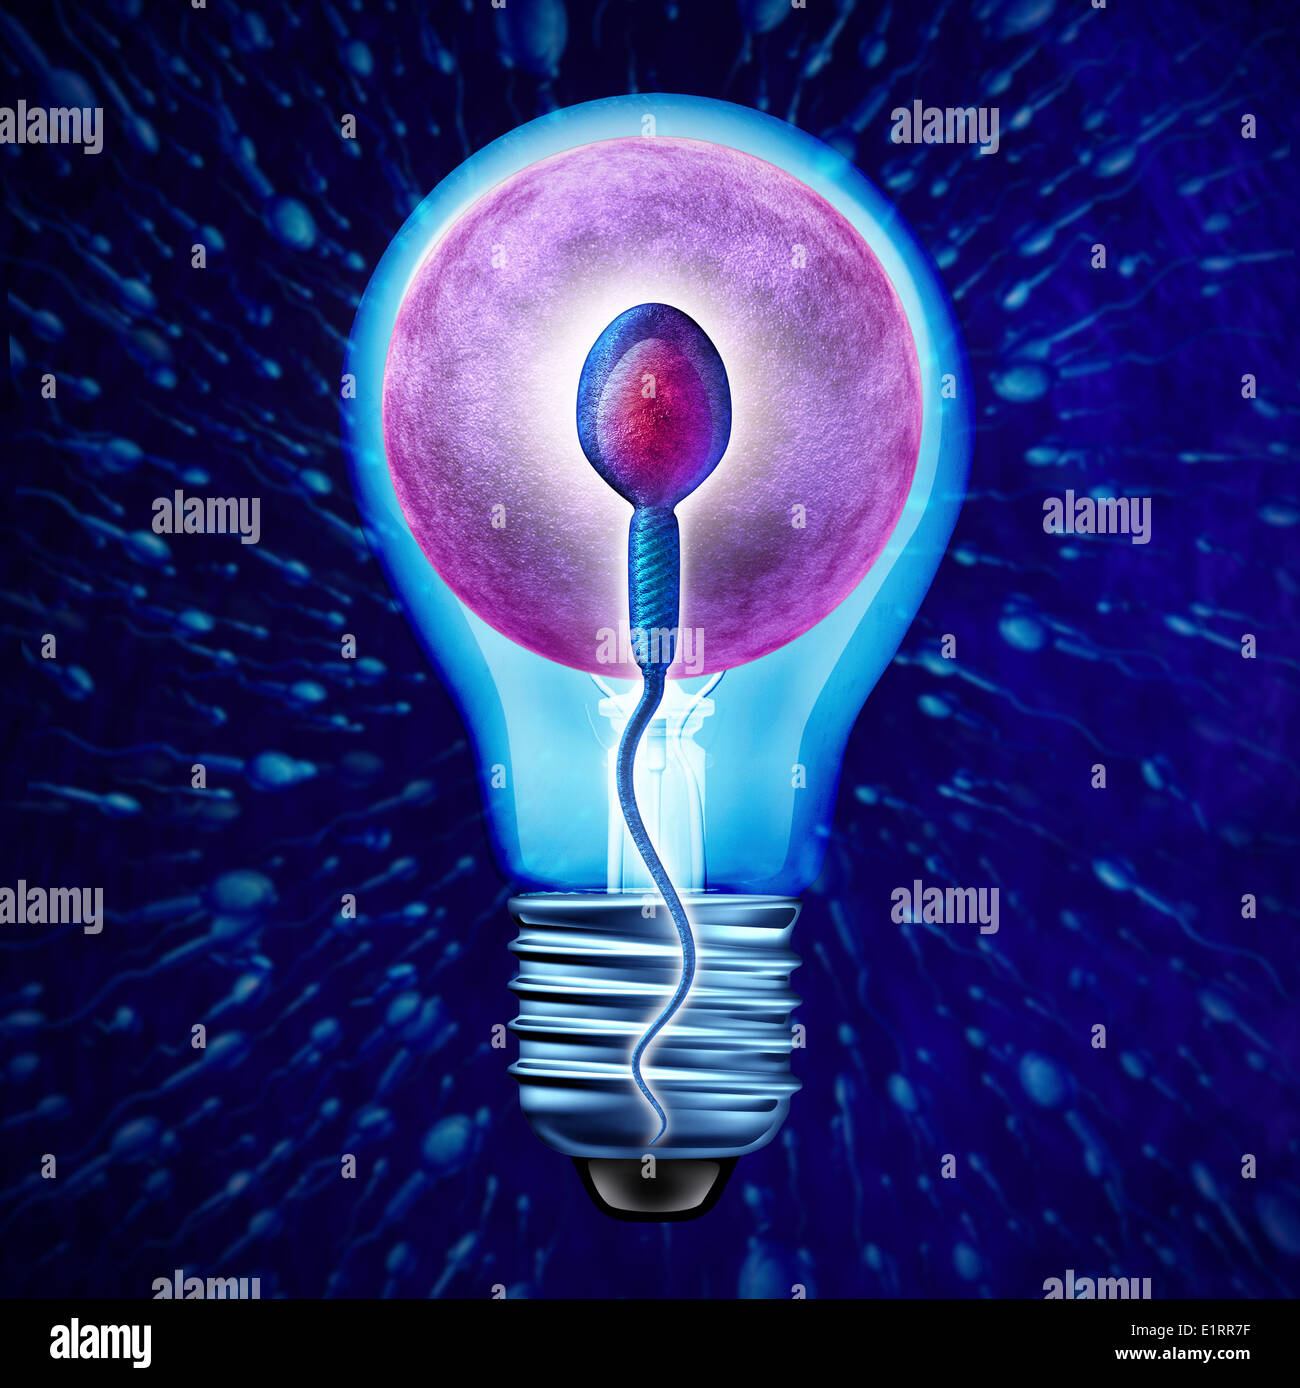 Fertility solutions and reproductive science research as a sperm cell on an illuminated lightbulb with a human egg as a symbol of innovation for having healthy babies. Stock Photo